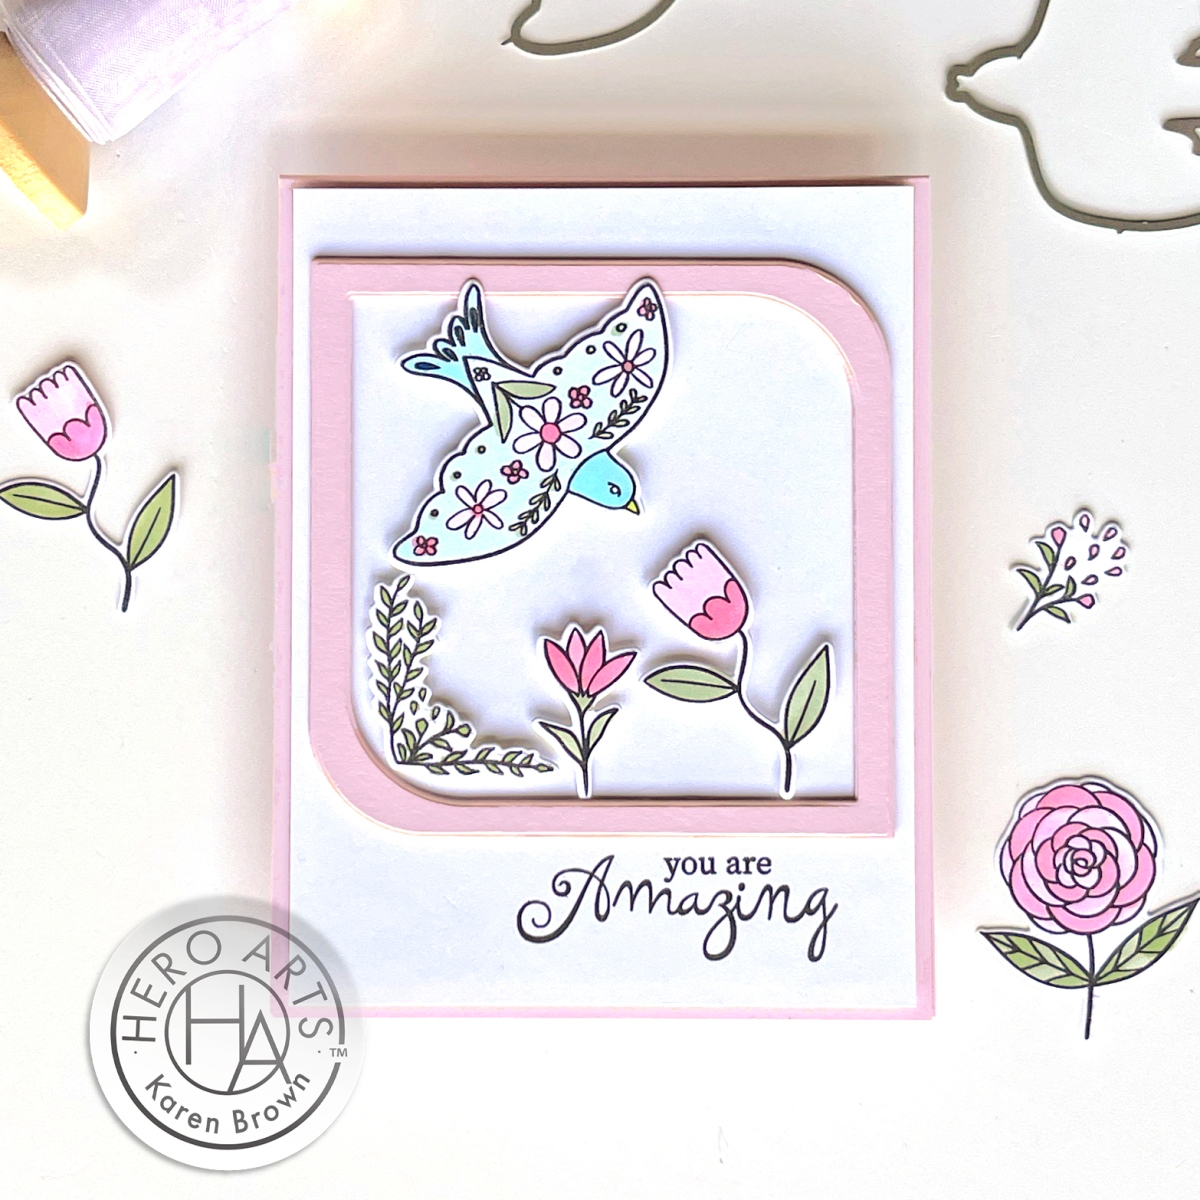 Folk Art stamped and die cut floral scene card  with a soaring bird in pink, aqua and white.